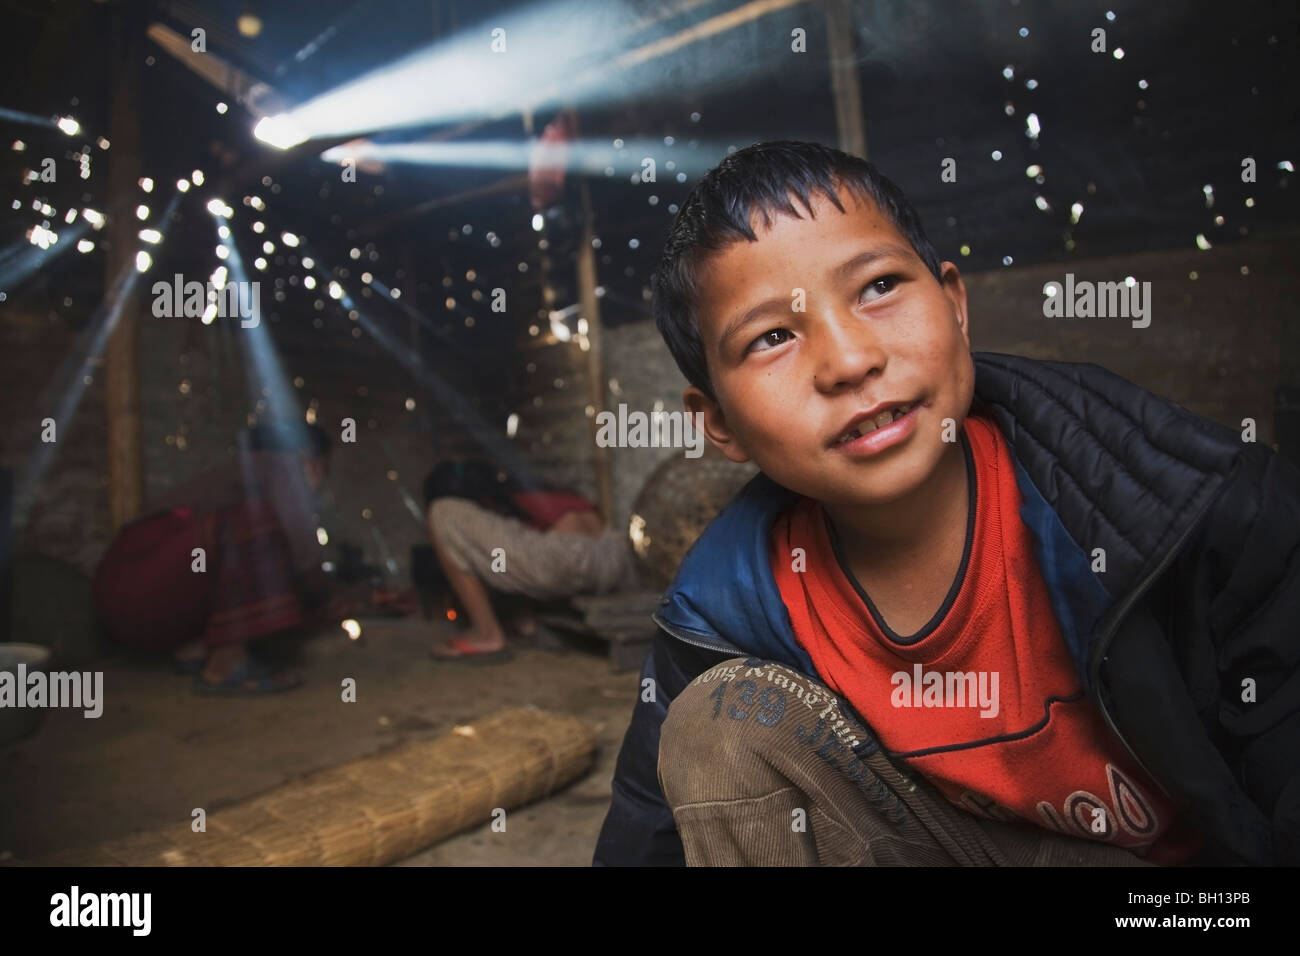 Smiling boy in a cook shack, Pokhara, Nepal Stock Photo